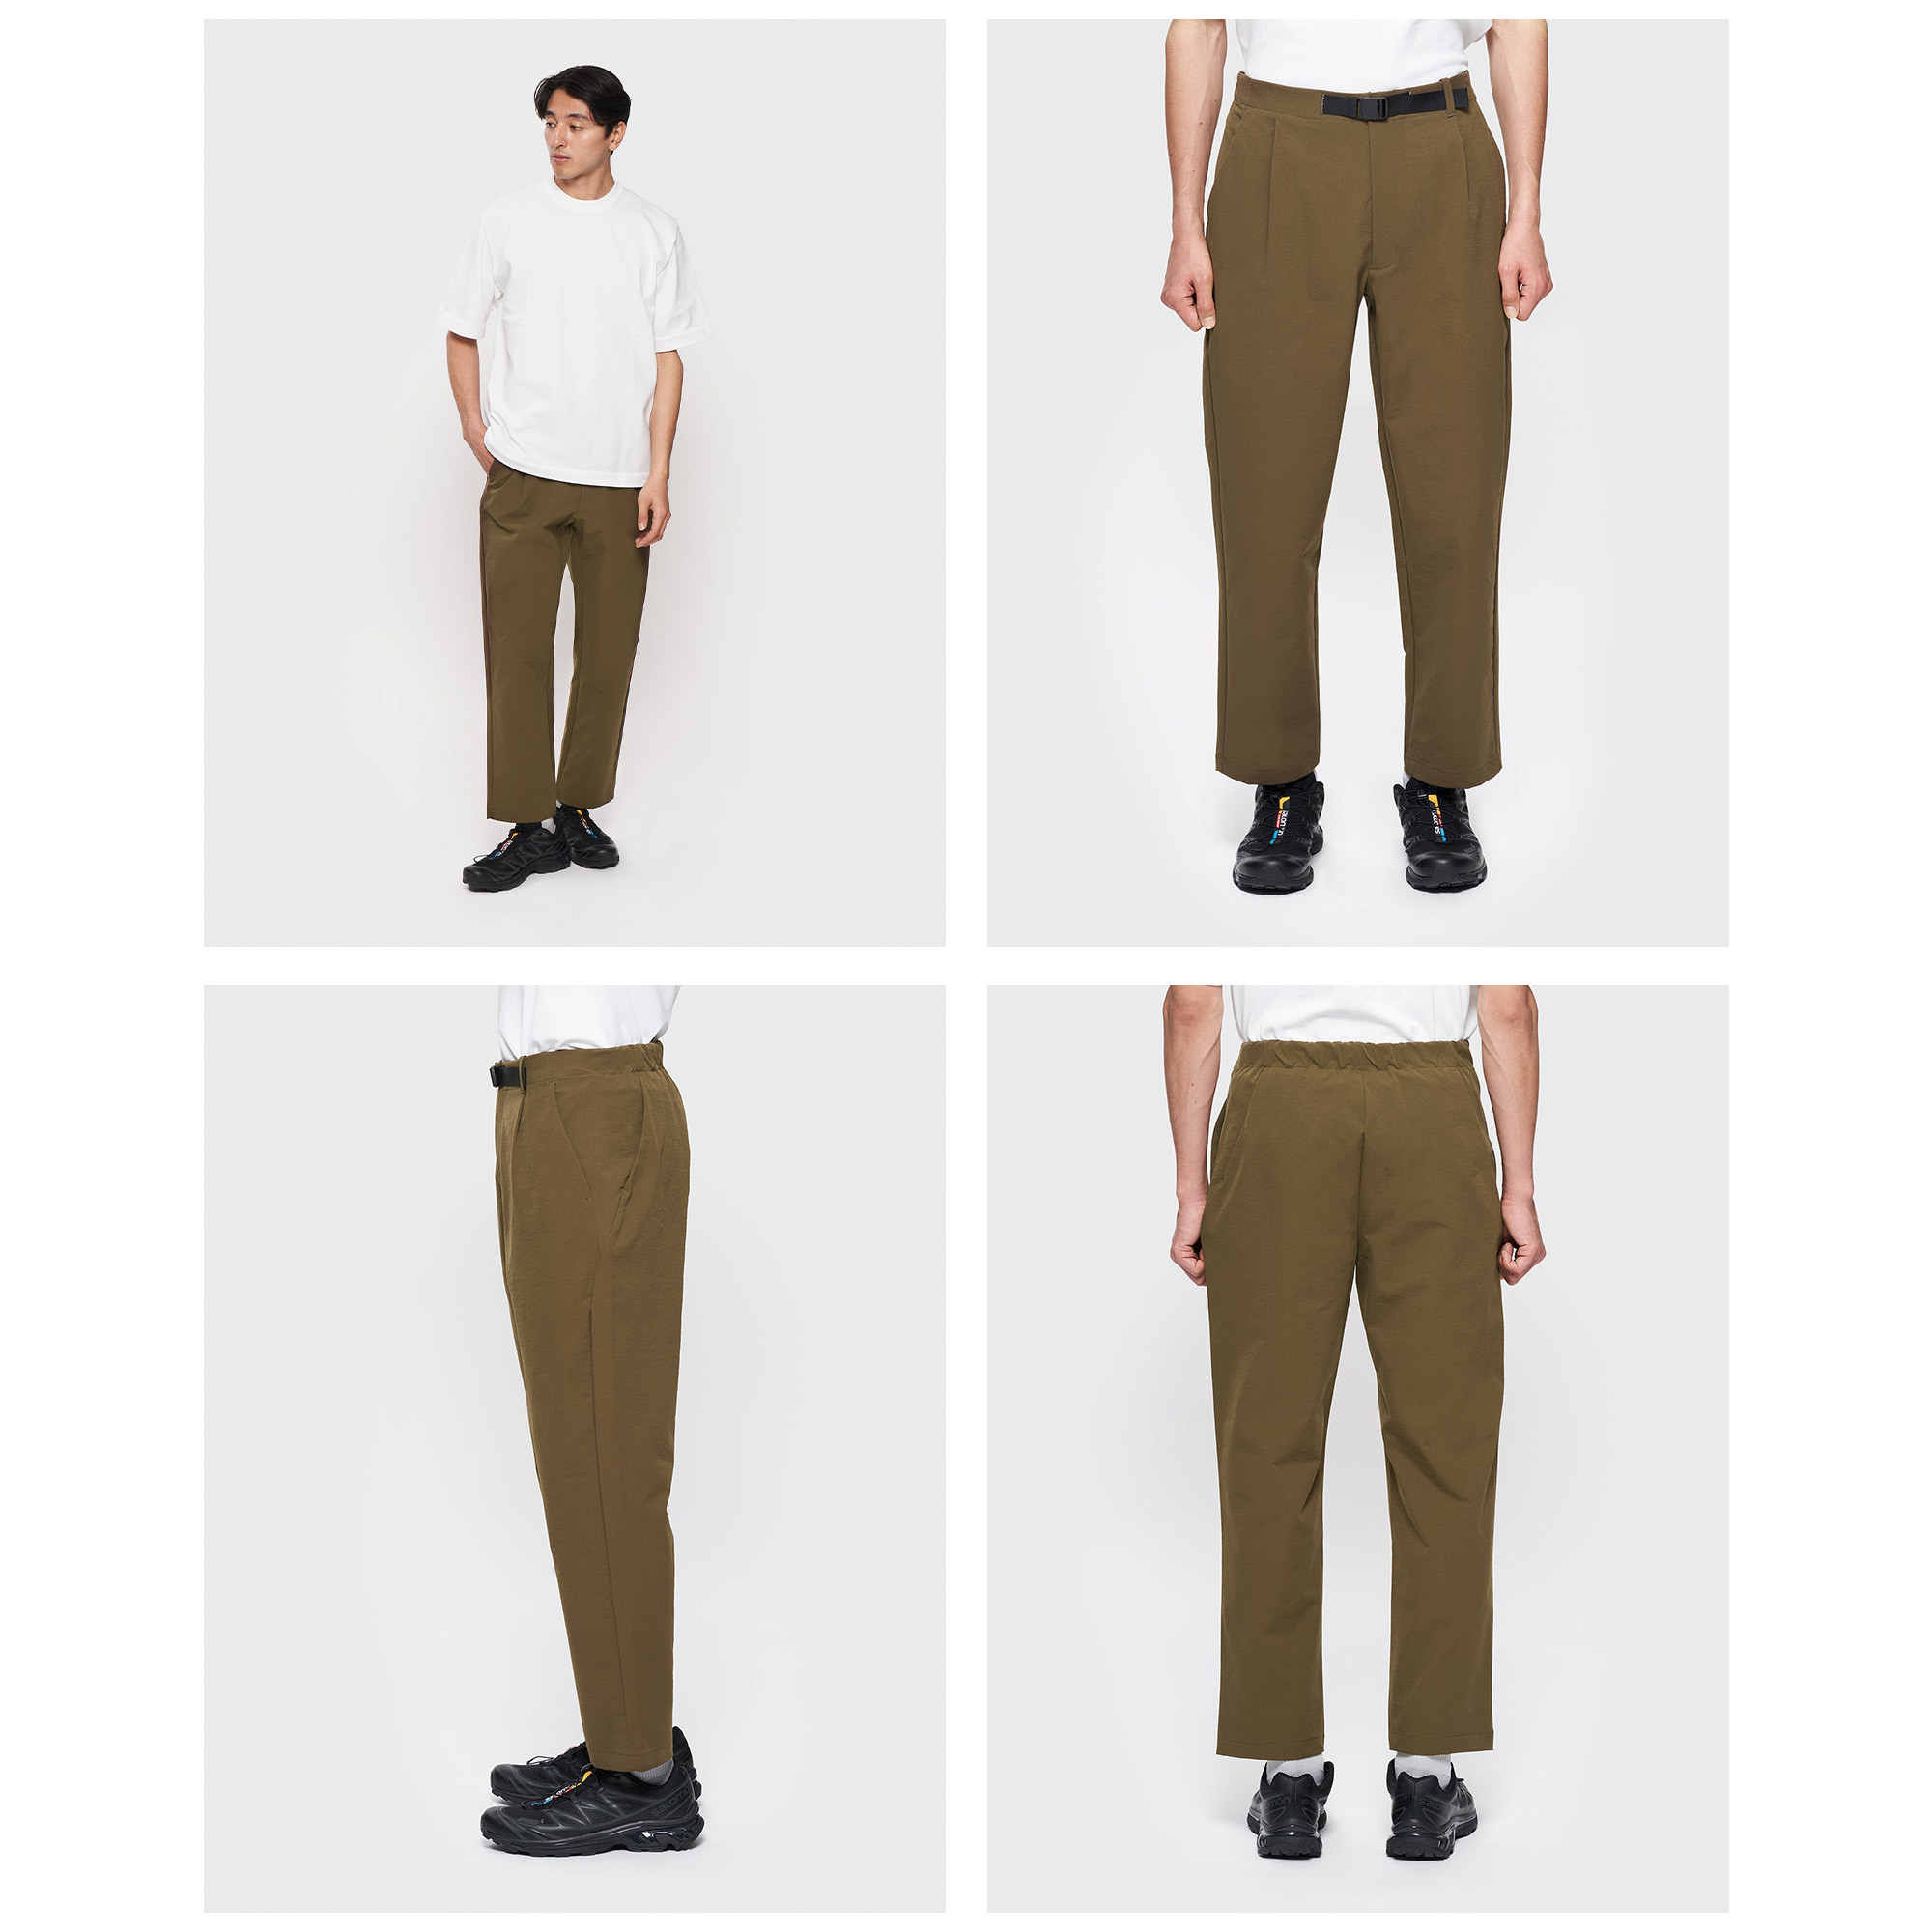 Goldwin’s Pants Guide for Spring Summer | Product Guides | Goldwin ...